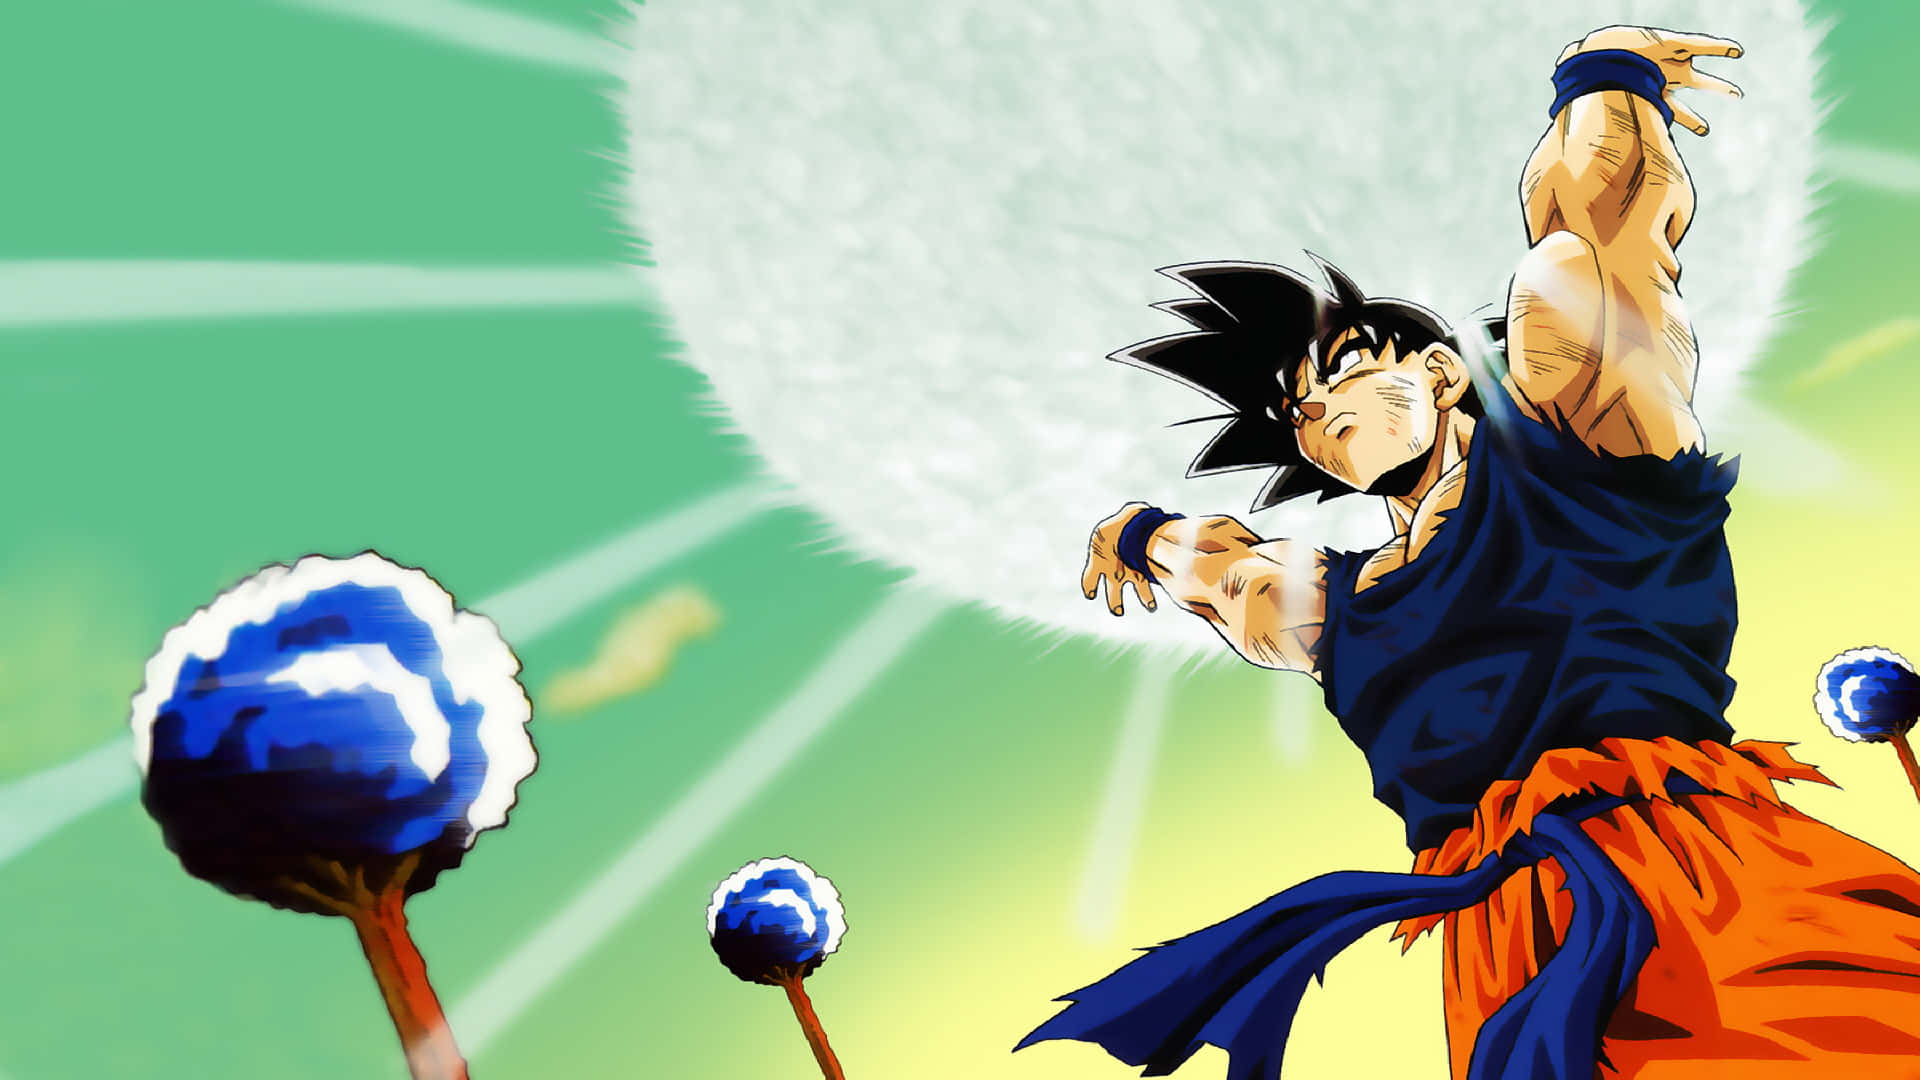 Download Unlock the power of Dragon Ball on your iPhone Wallpaper